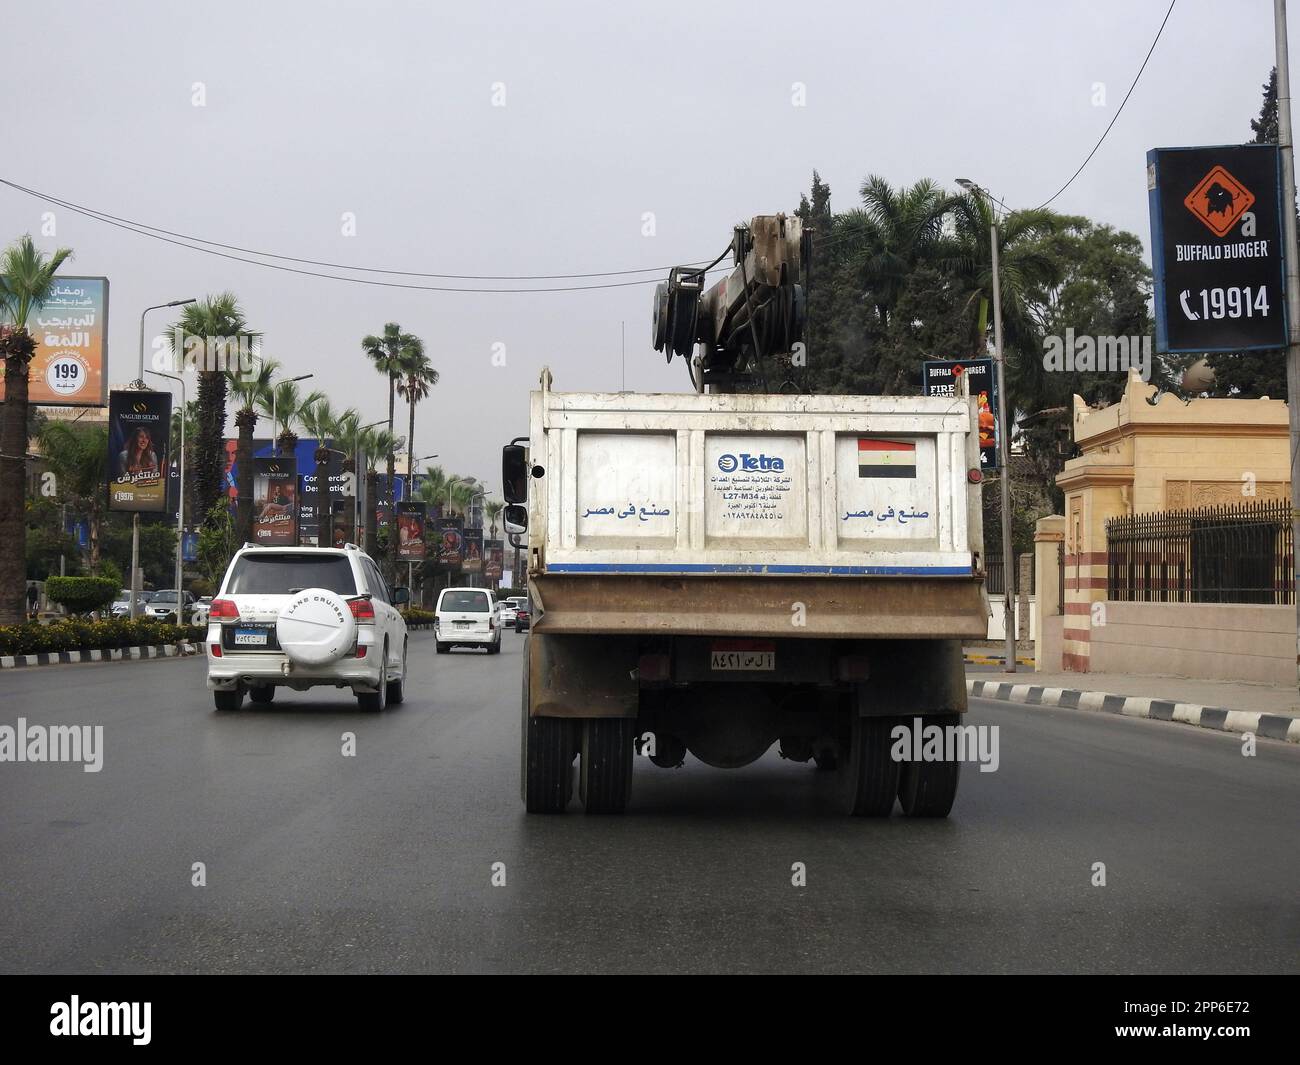 Cairo, Egypt, April 8 2023: Maintenance lift truck with a lifting mechanical equipped crane with a cable for lifting heavy objects Tetra transport tru Stock Photo